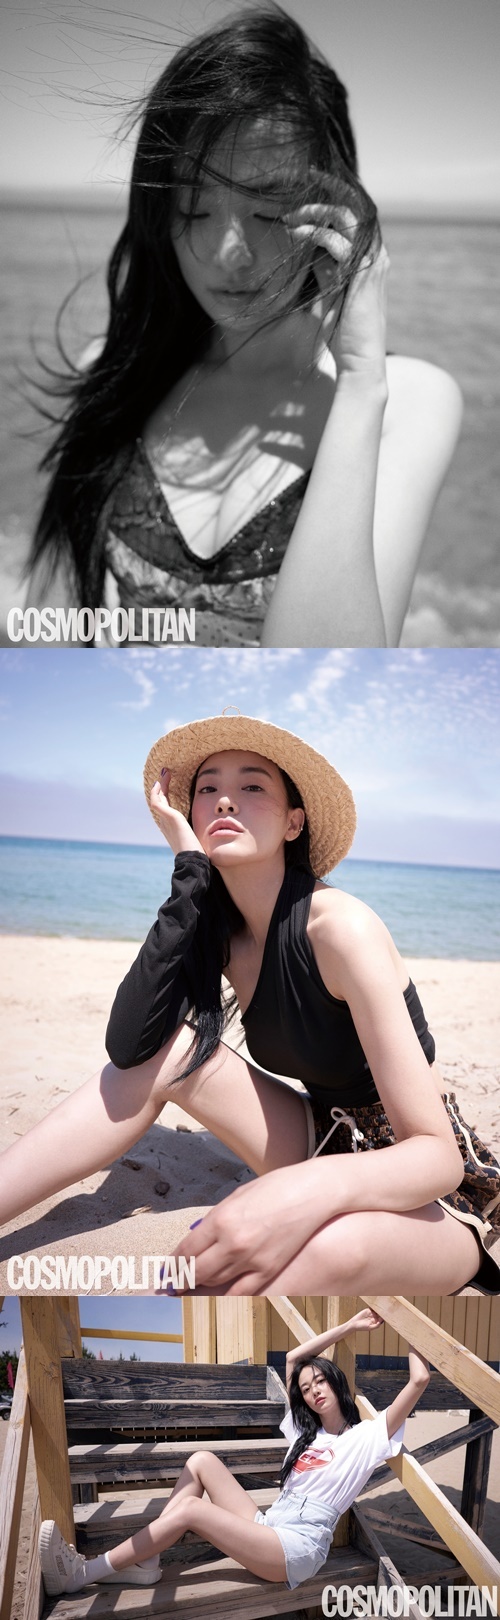 Actor Lee Joo-yeon has released a July issue photo with fashion magazine Cosmopolitan.Lee Joo-yeon showed Summer fashion, which is suitable for the modifier Goddess, which is usually a plain clothes in this picture taken in Yangyang Surf Beach, Gangwon Province.Lee Joo-yeon in the public picture perfectly digested various styles using Summer items and showed off the picture goddess aspect.He showed off his style of Summer, full of fresh charging, by matching the print T-shirt of the esthetic mood, the bag of logo straps to the green color top and skirt, and the navy bag with points on white knit and short pants.On the other hand, the white denim top and layered jewelery were styled with modern hobo bags resembling petals, showing off the feminine atmosphere without regret.Meanwhile, Lee Joo-yeon recently appeared in Civilization Express as an after school complete.